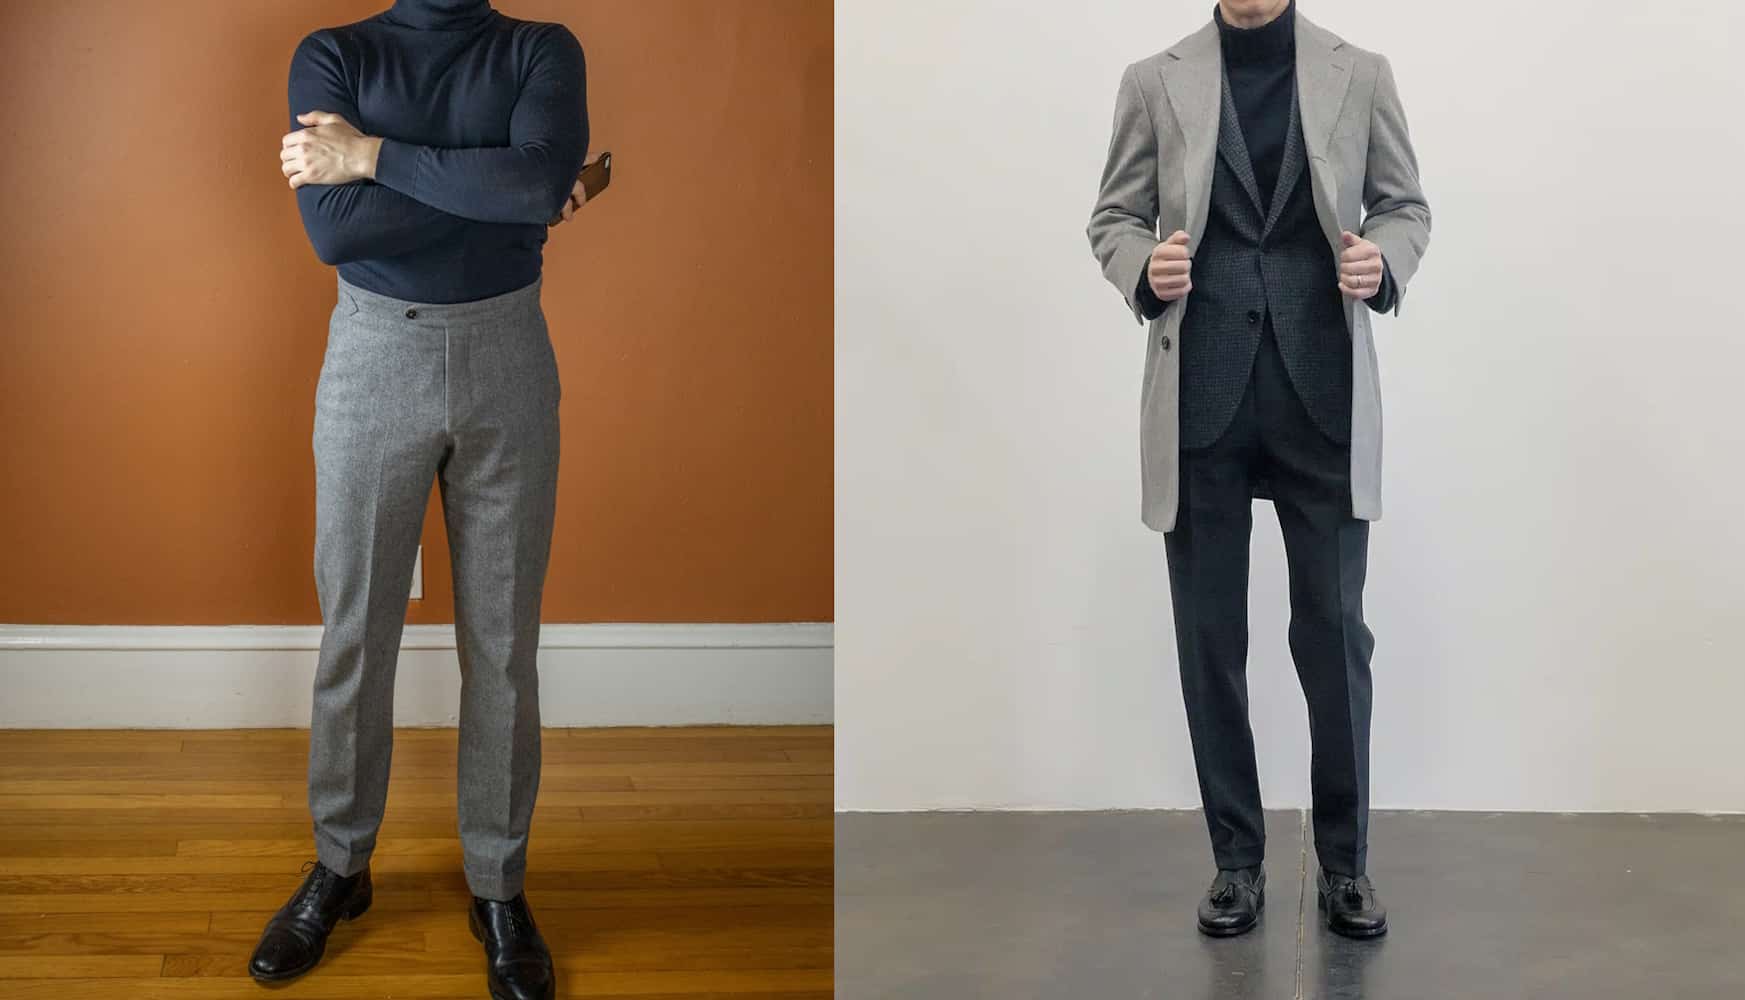 How To Style Formal Wear For Cold Weather